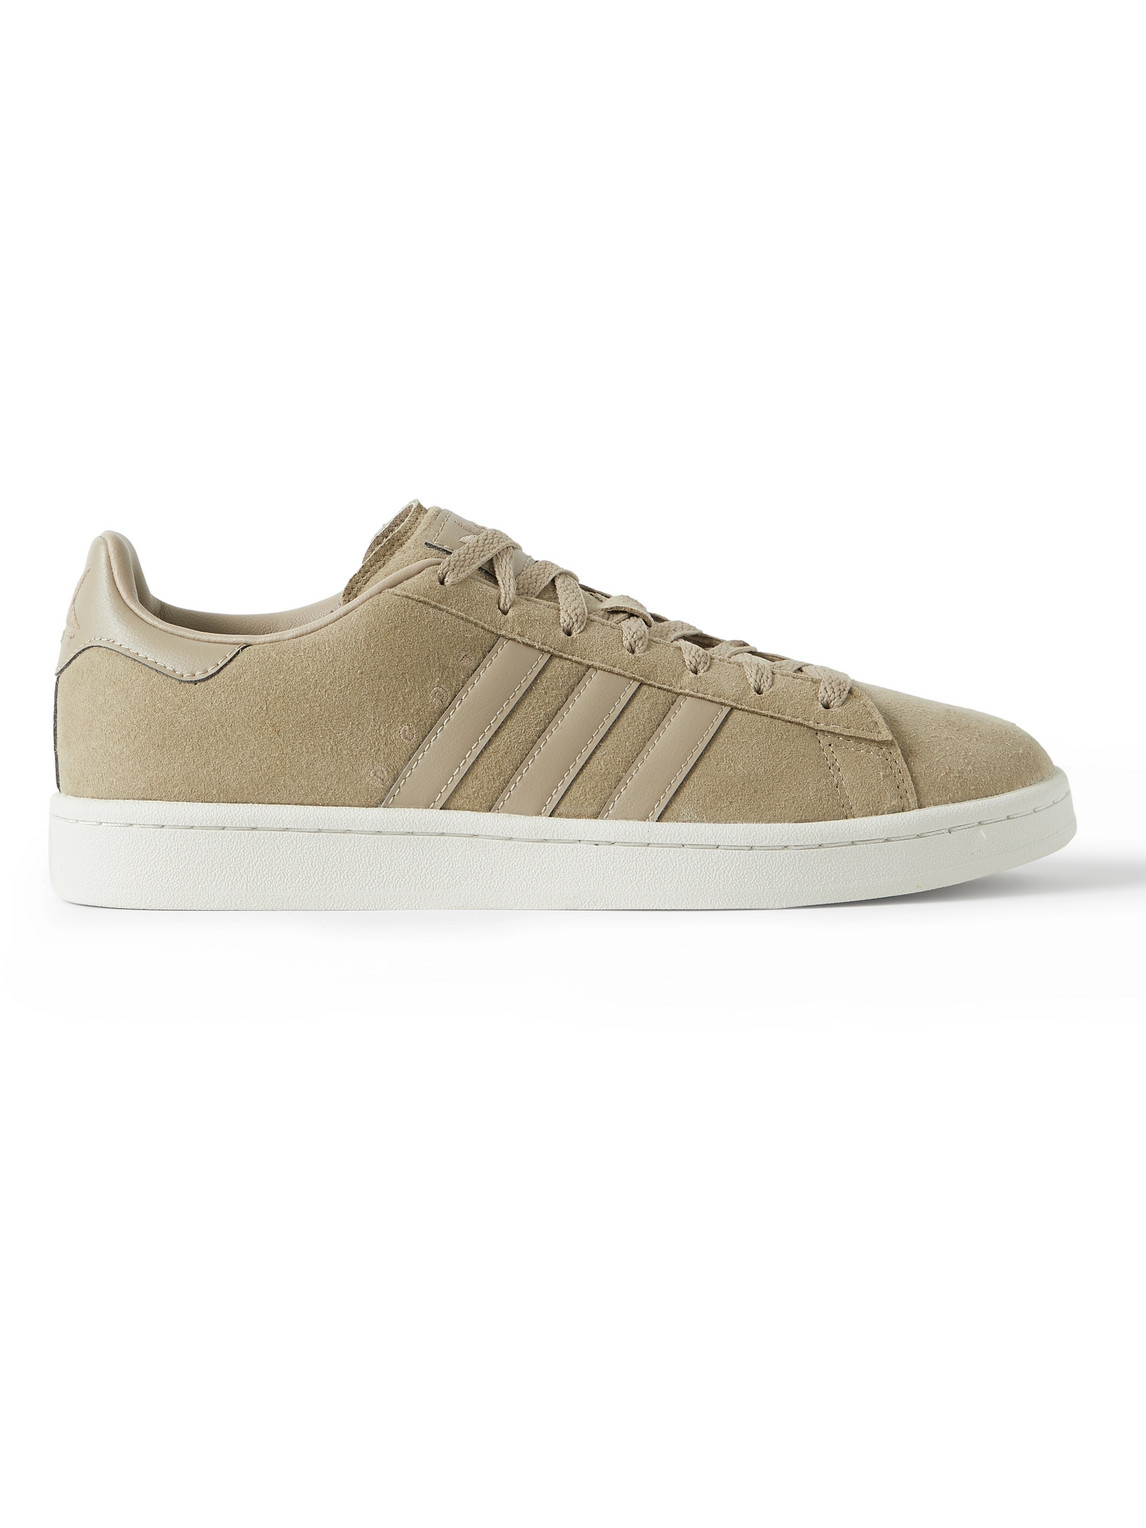 DESCENDANT Campus Leather-Trimmed Suede Sneakers